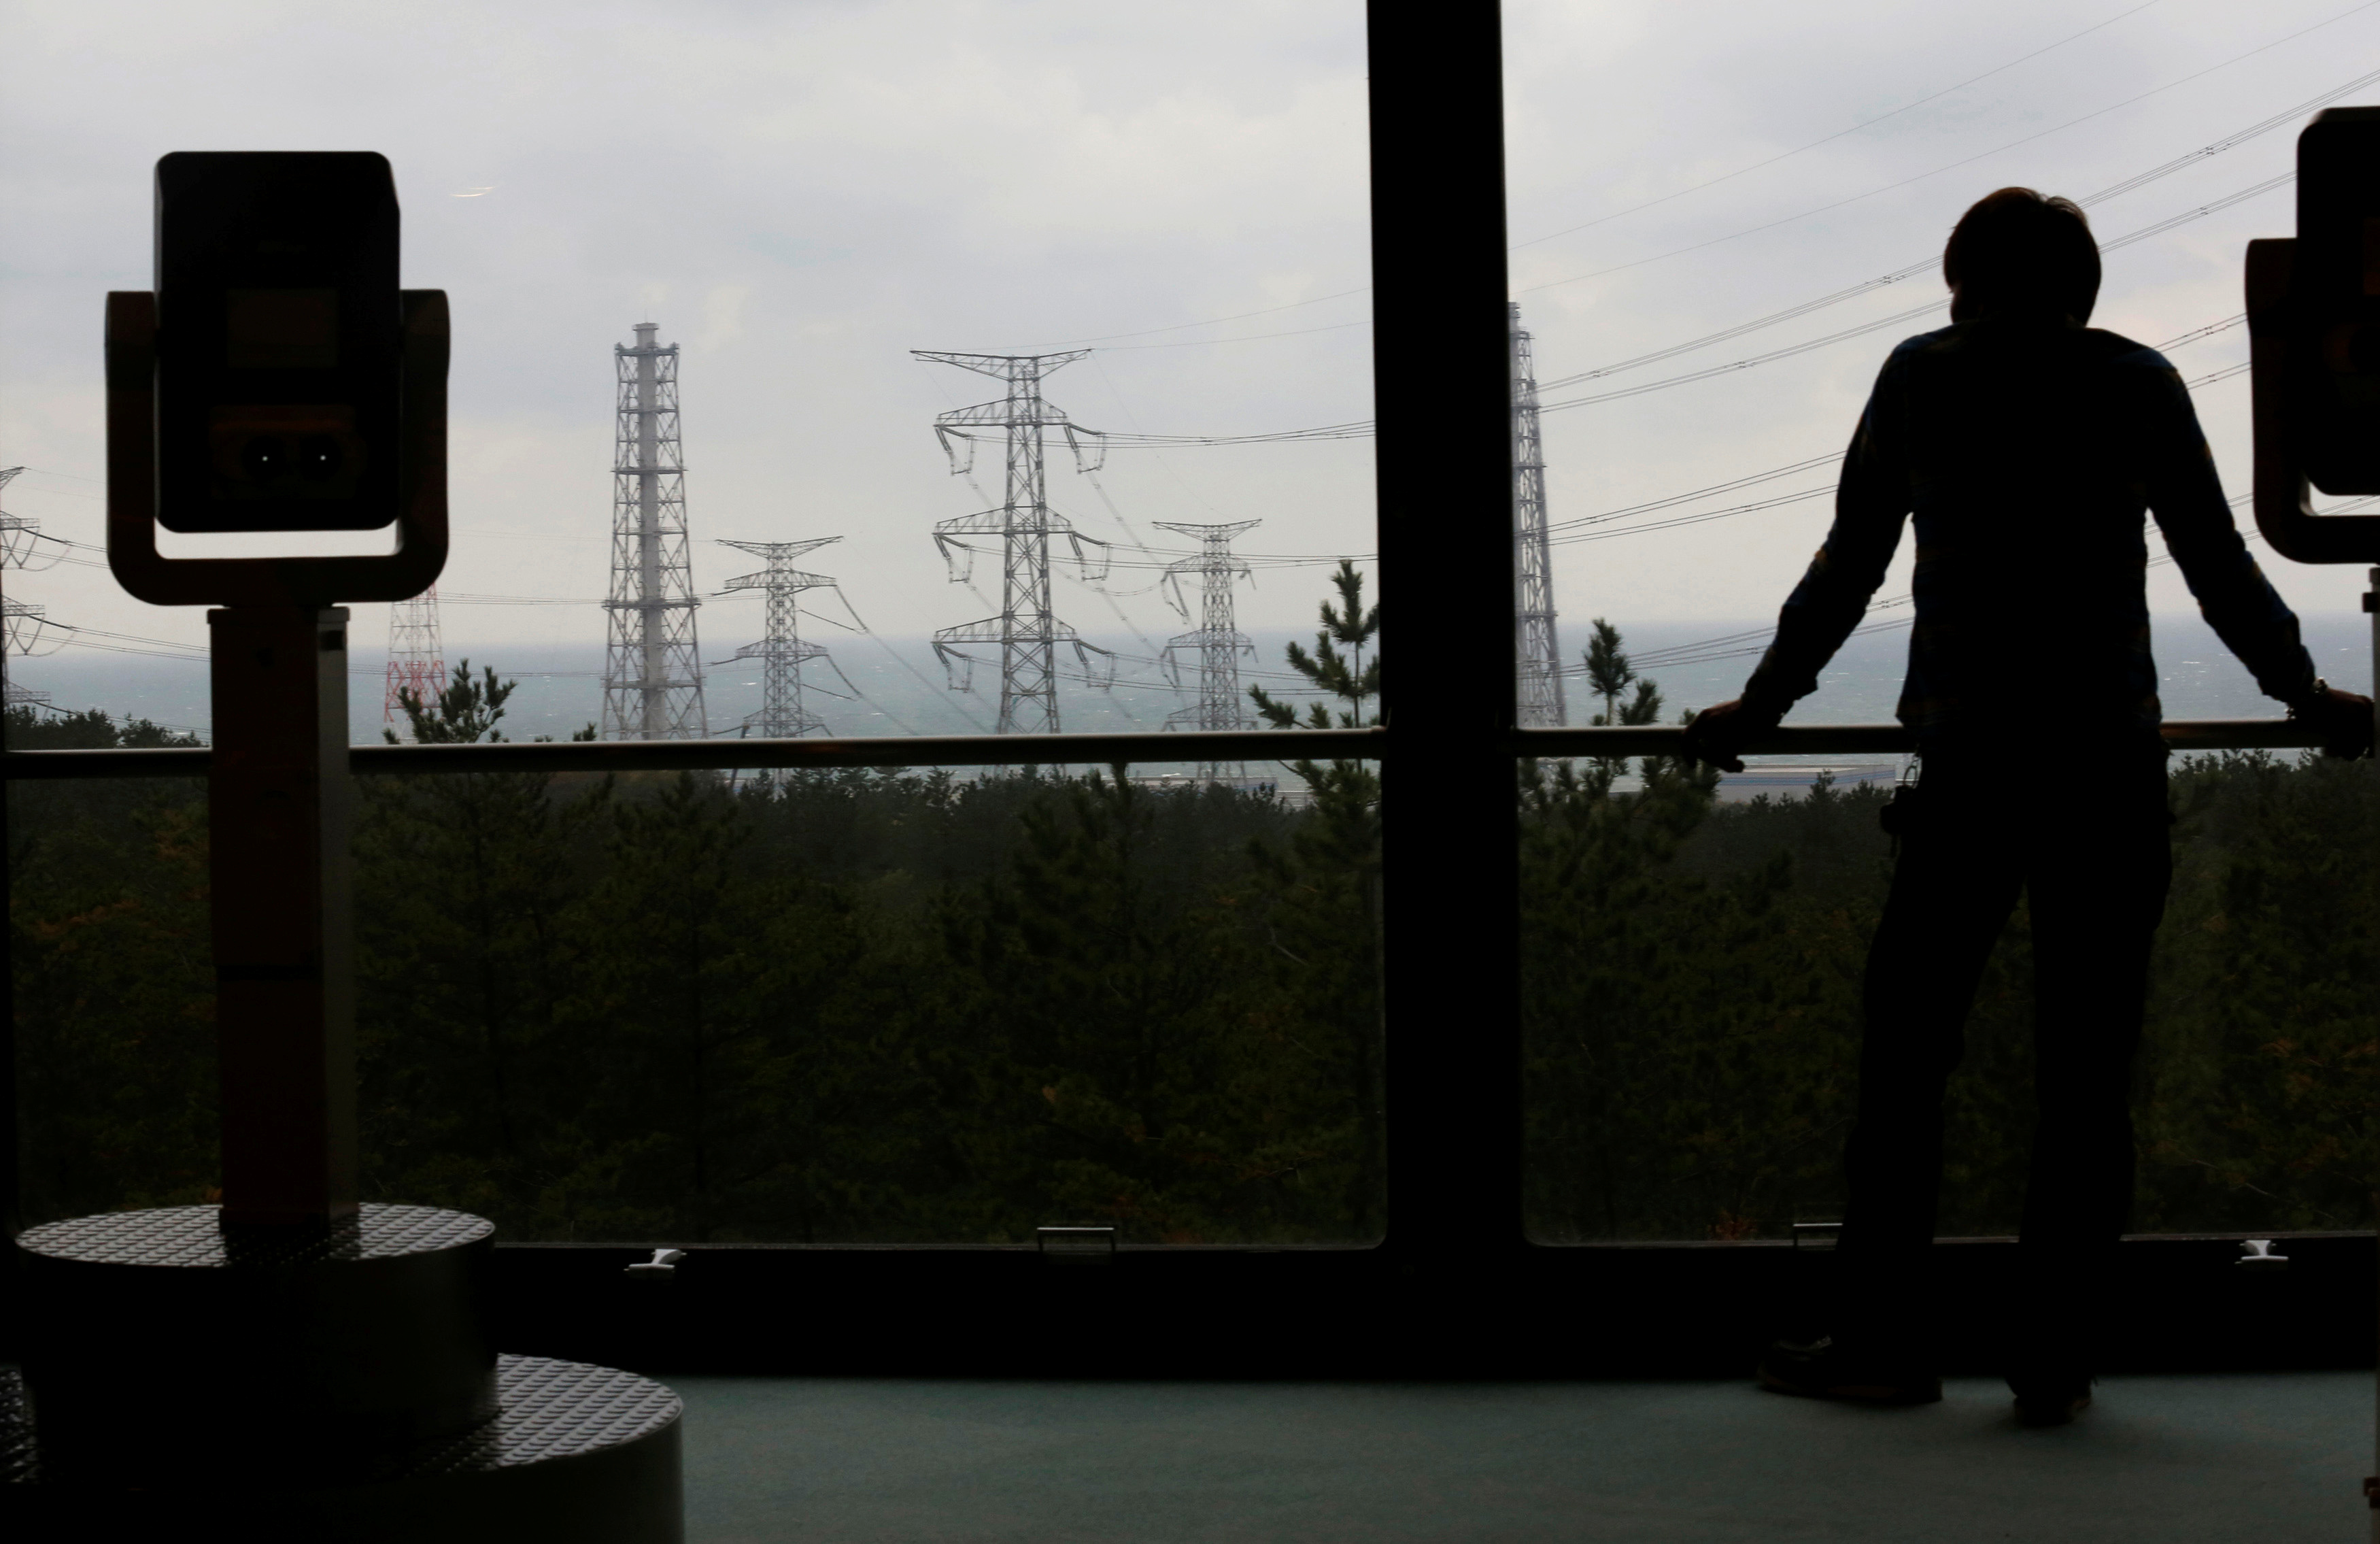 A visitor is silhouetted next to a pair of binoculars as he looks at Tokyo Electric Power Co.'s (TEPCO) Kashiwazaki Kariwa nuclear power plant, which is the world's biggest, at an observatory of its exhibition hall in Kashiwazaki November 12, 2012.  REUTERS/Kim Kyung-Hoon